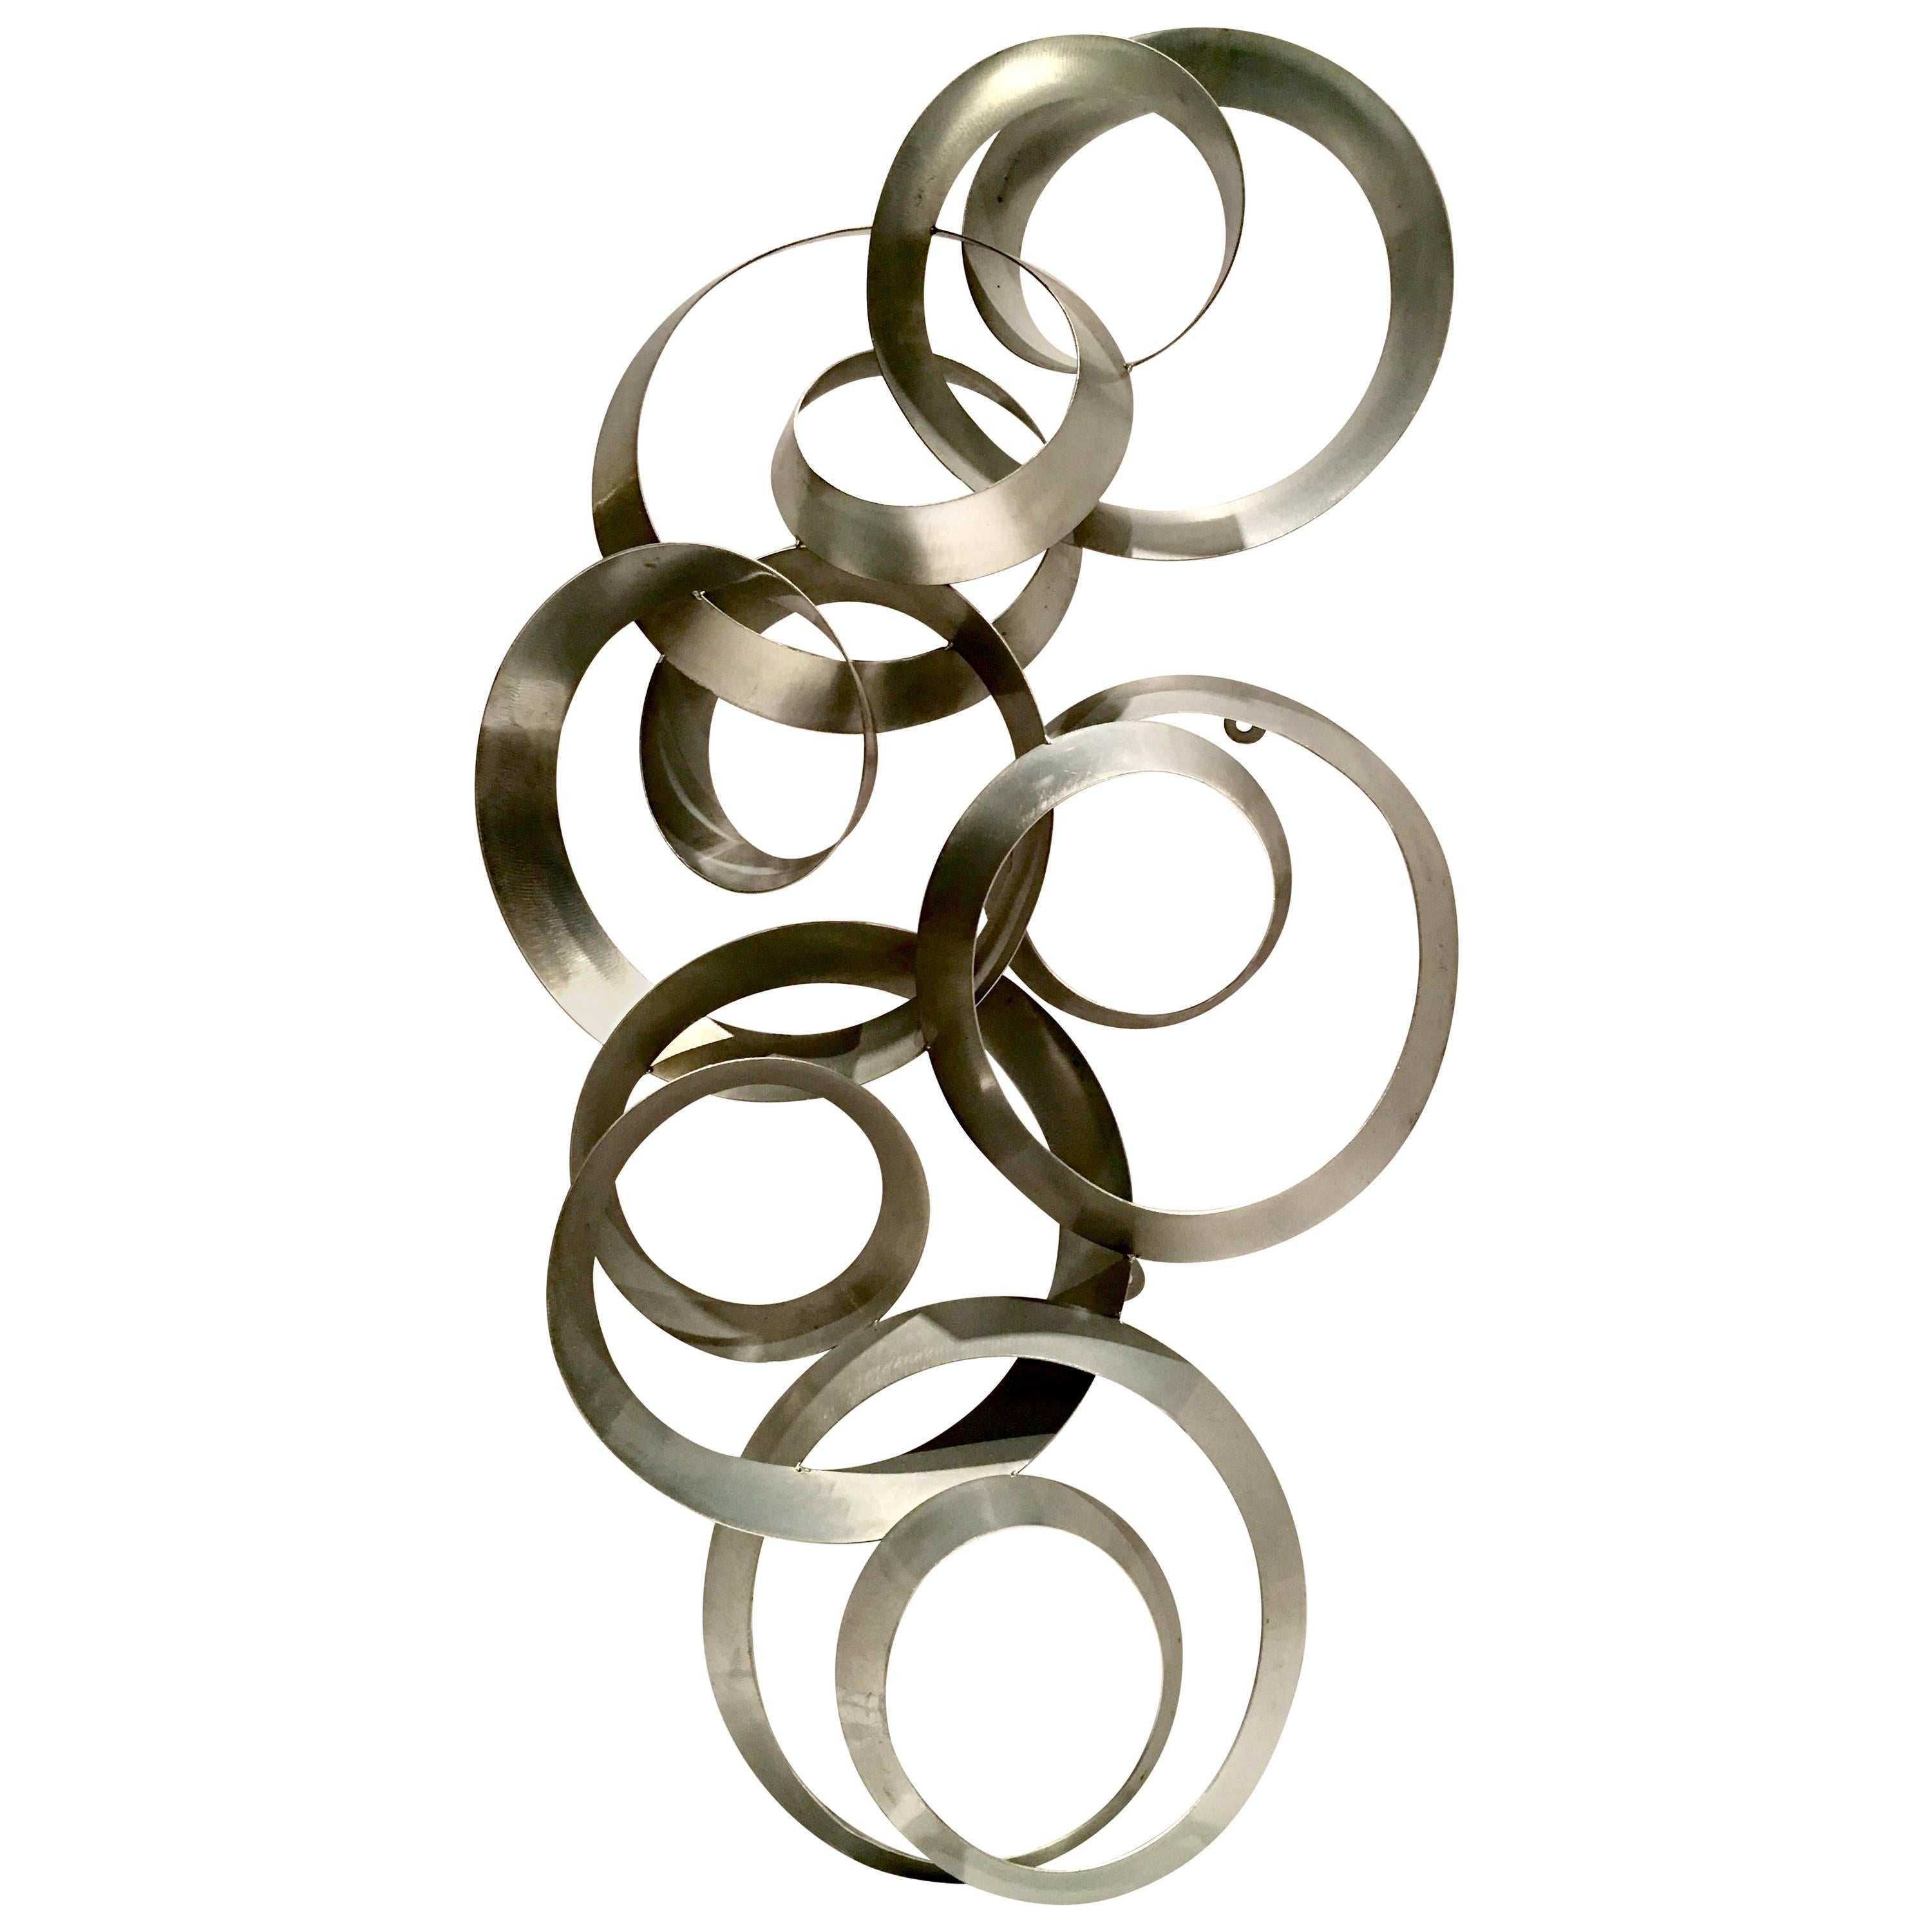 C. Jere Brushed Steel "Continuity" Dimensional Circles Hanging Sculpture